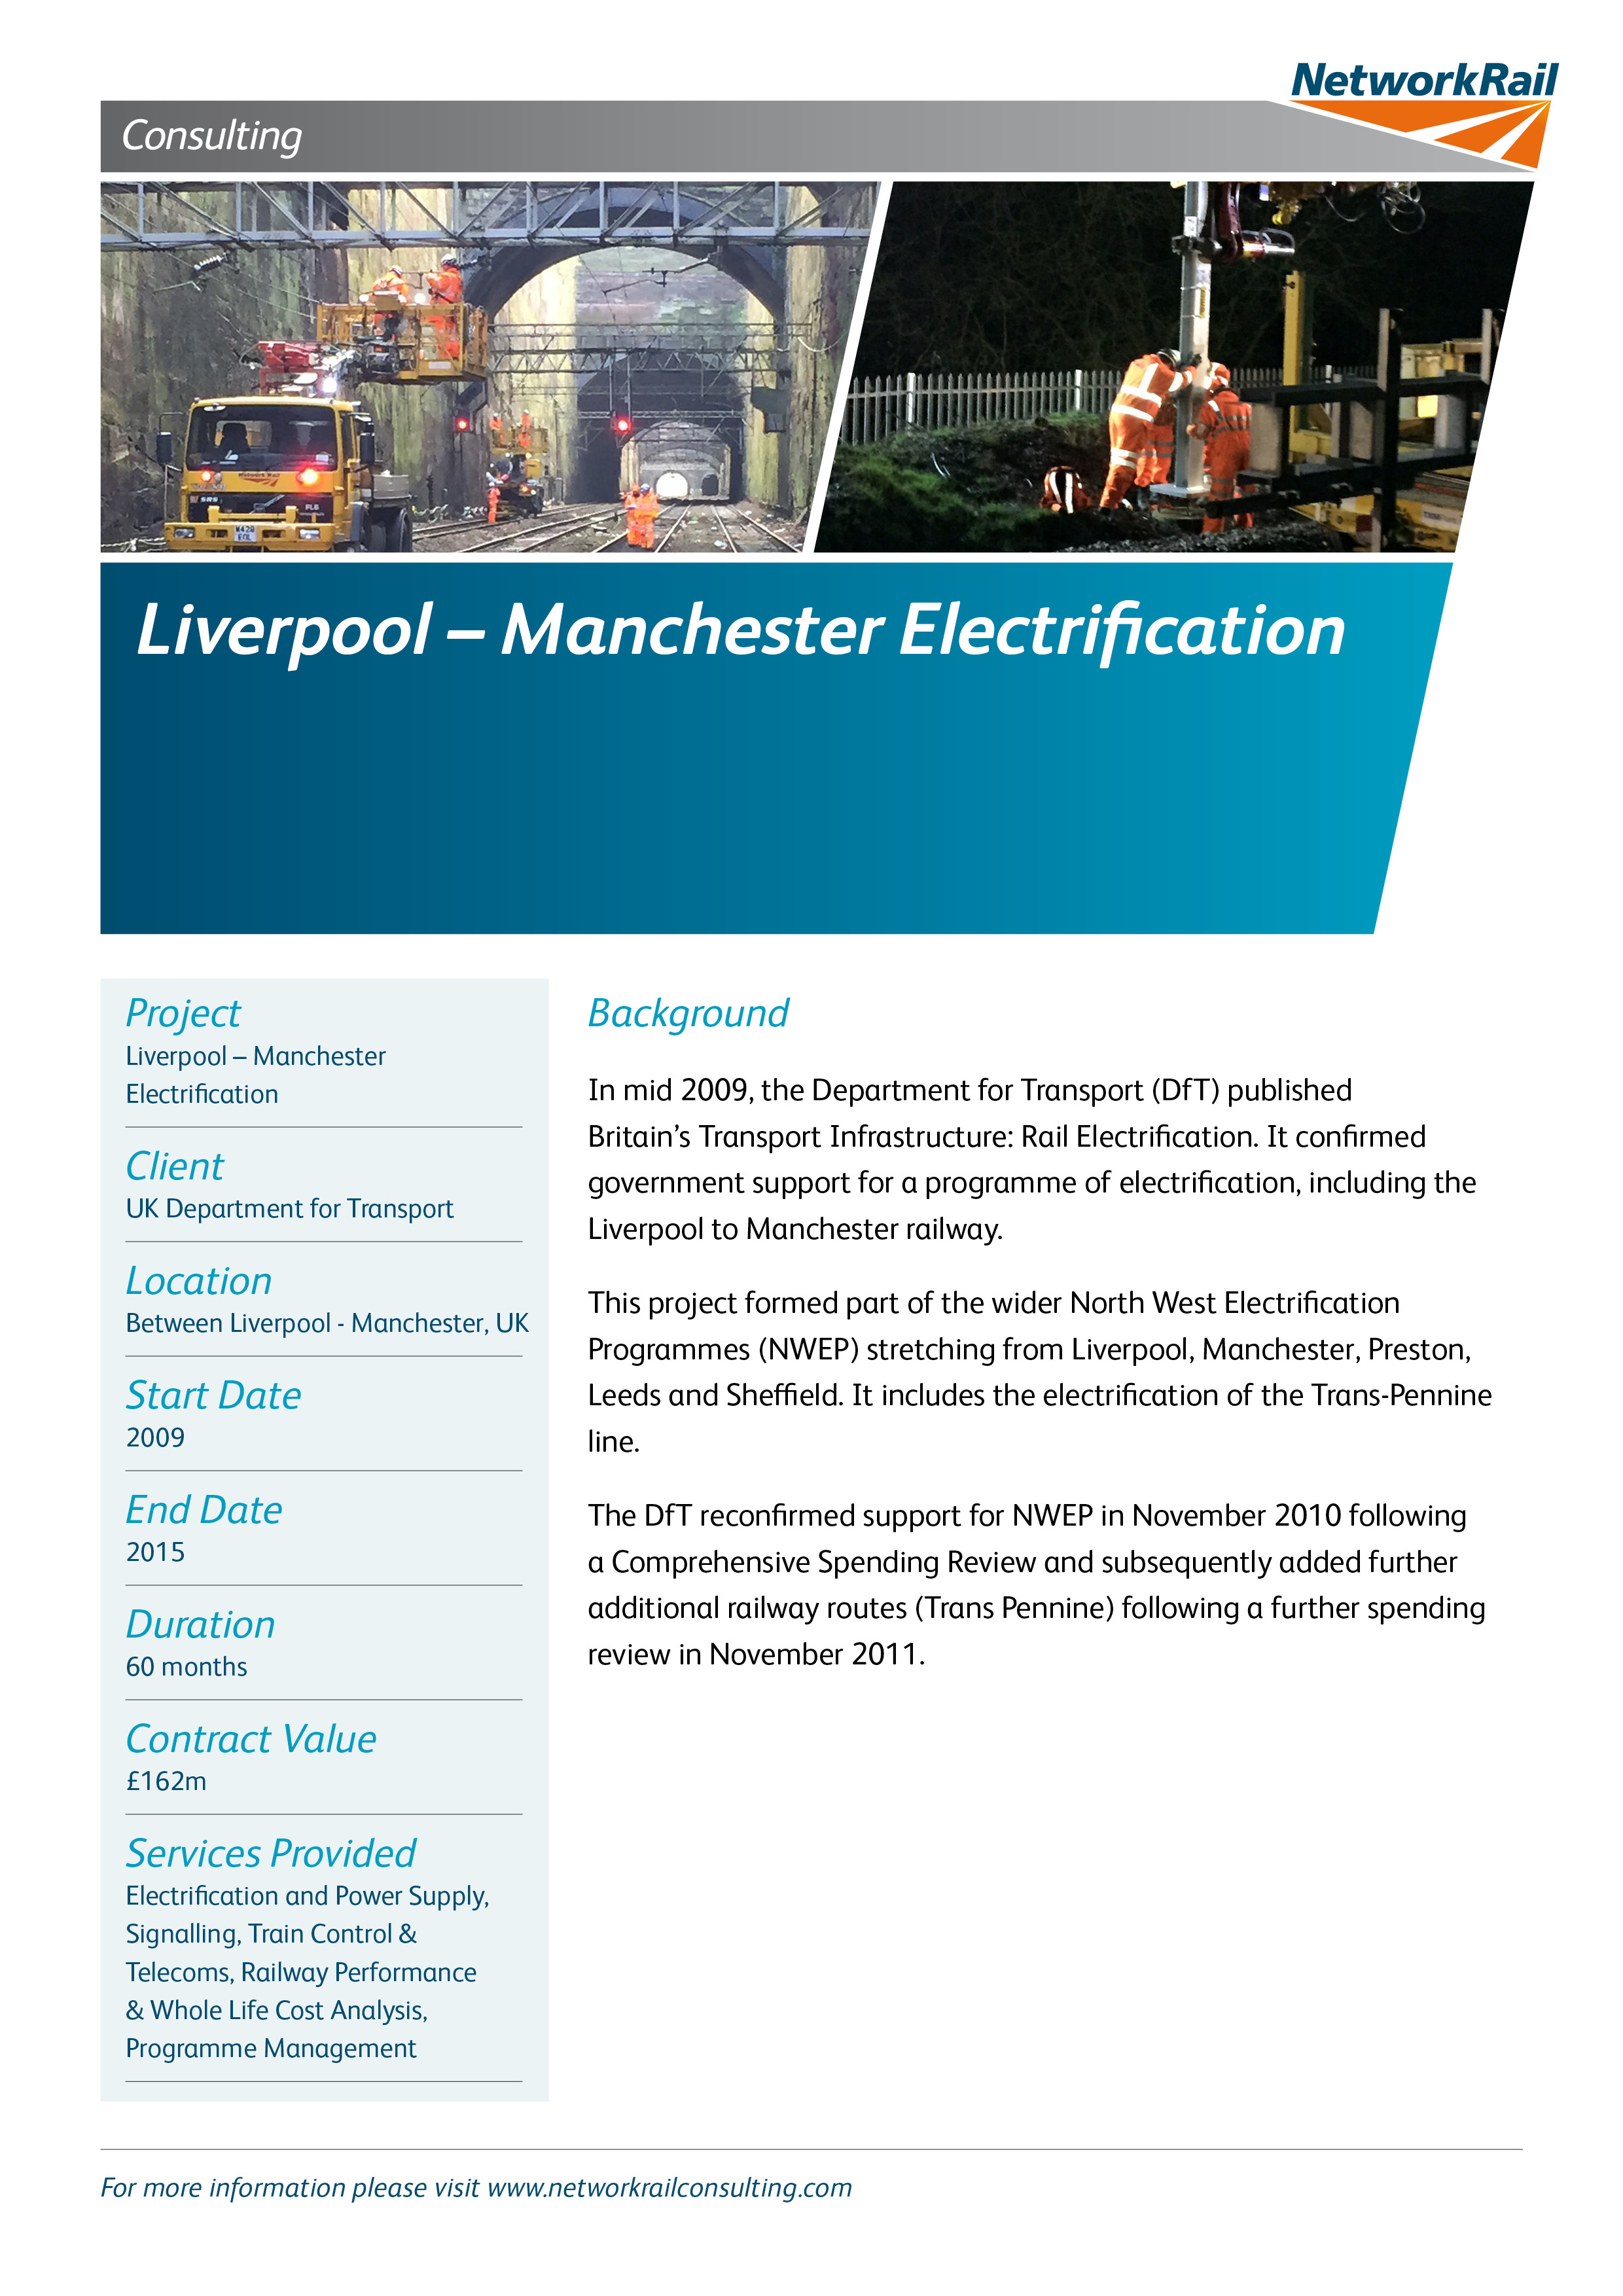 Liverpool Manchester Electrification